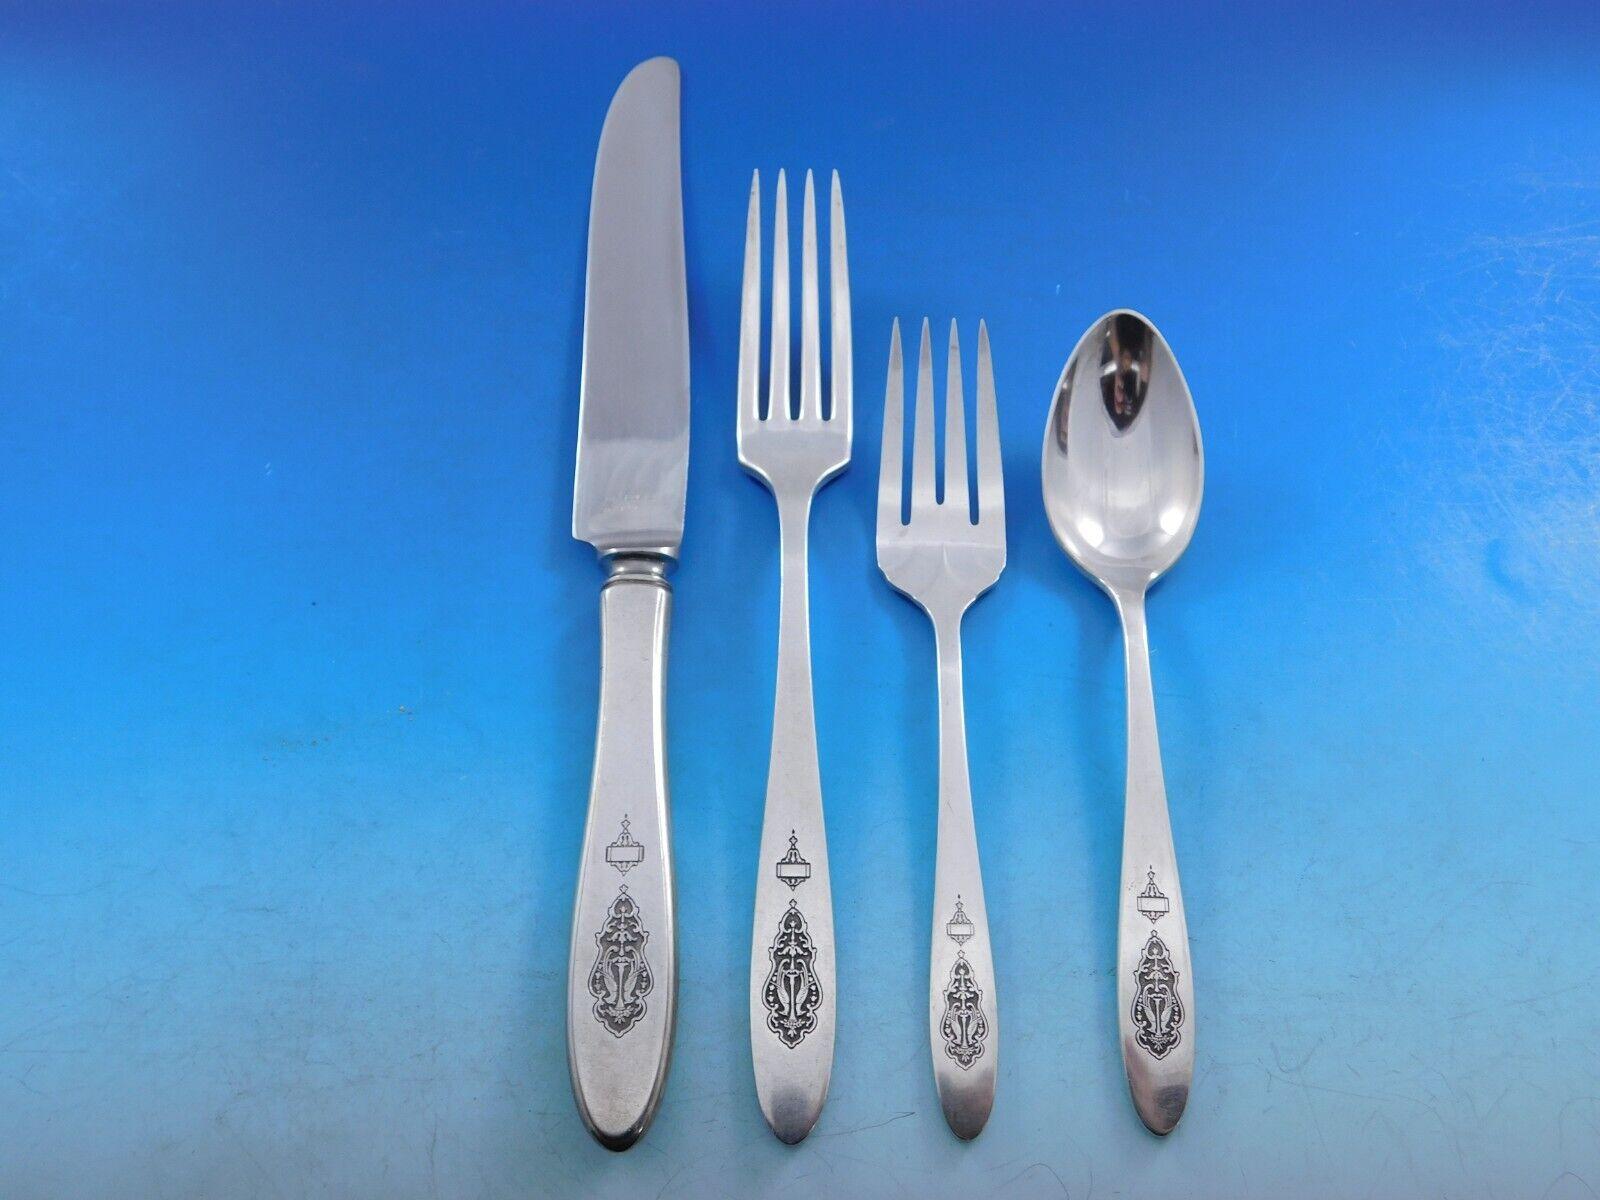 Dinner Size Bird of Paradise by Community Silverplate Dinner Size Flatware set - 115 pieces. This set includes:

24 Dinner Knives, 12 - 9 5/8